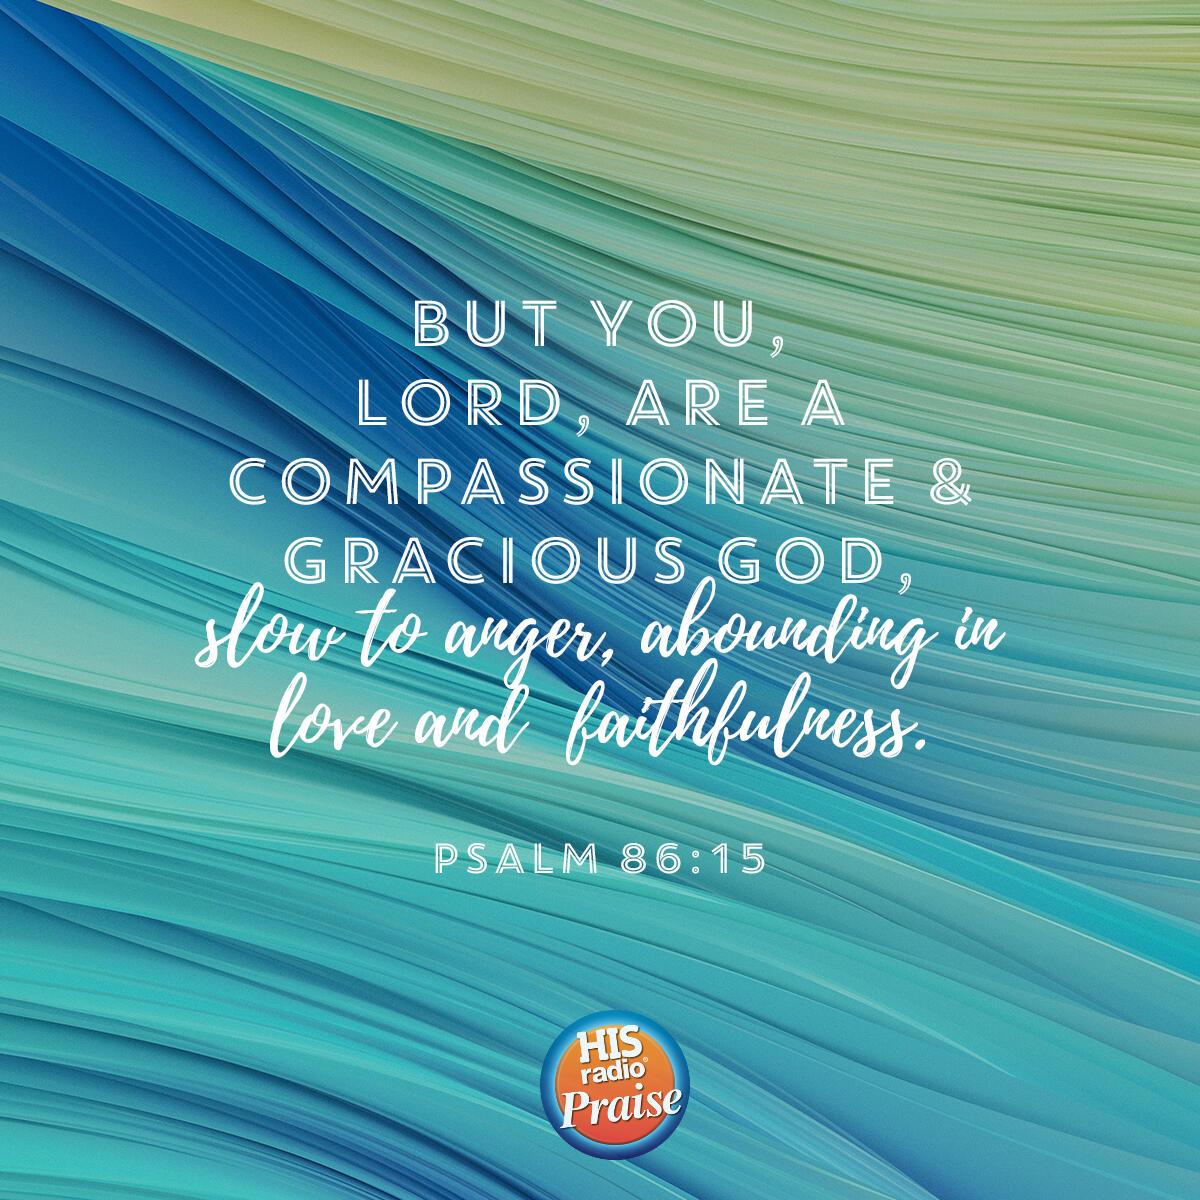 Psalm 86:15 - Verse of the Day